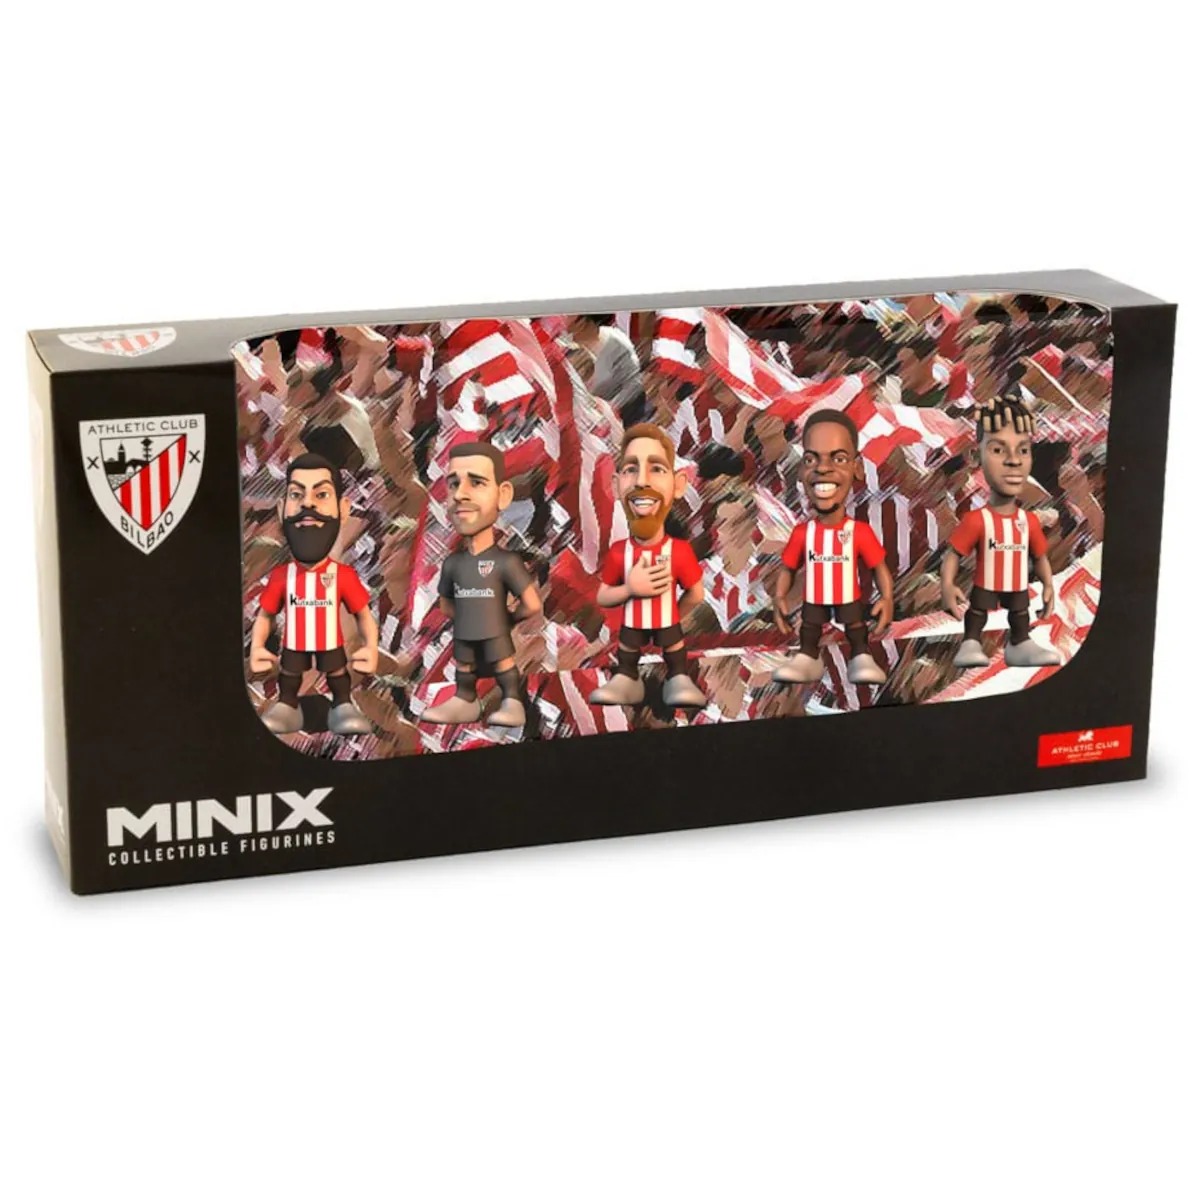 MN15092 Athletic Club 7cm MINIX Collectable Figures (5-Pack)